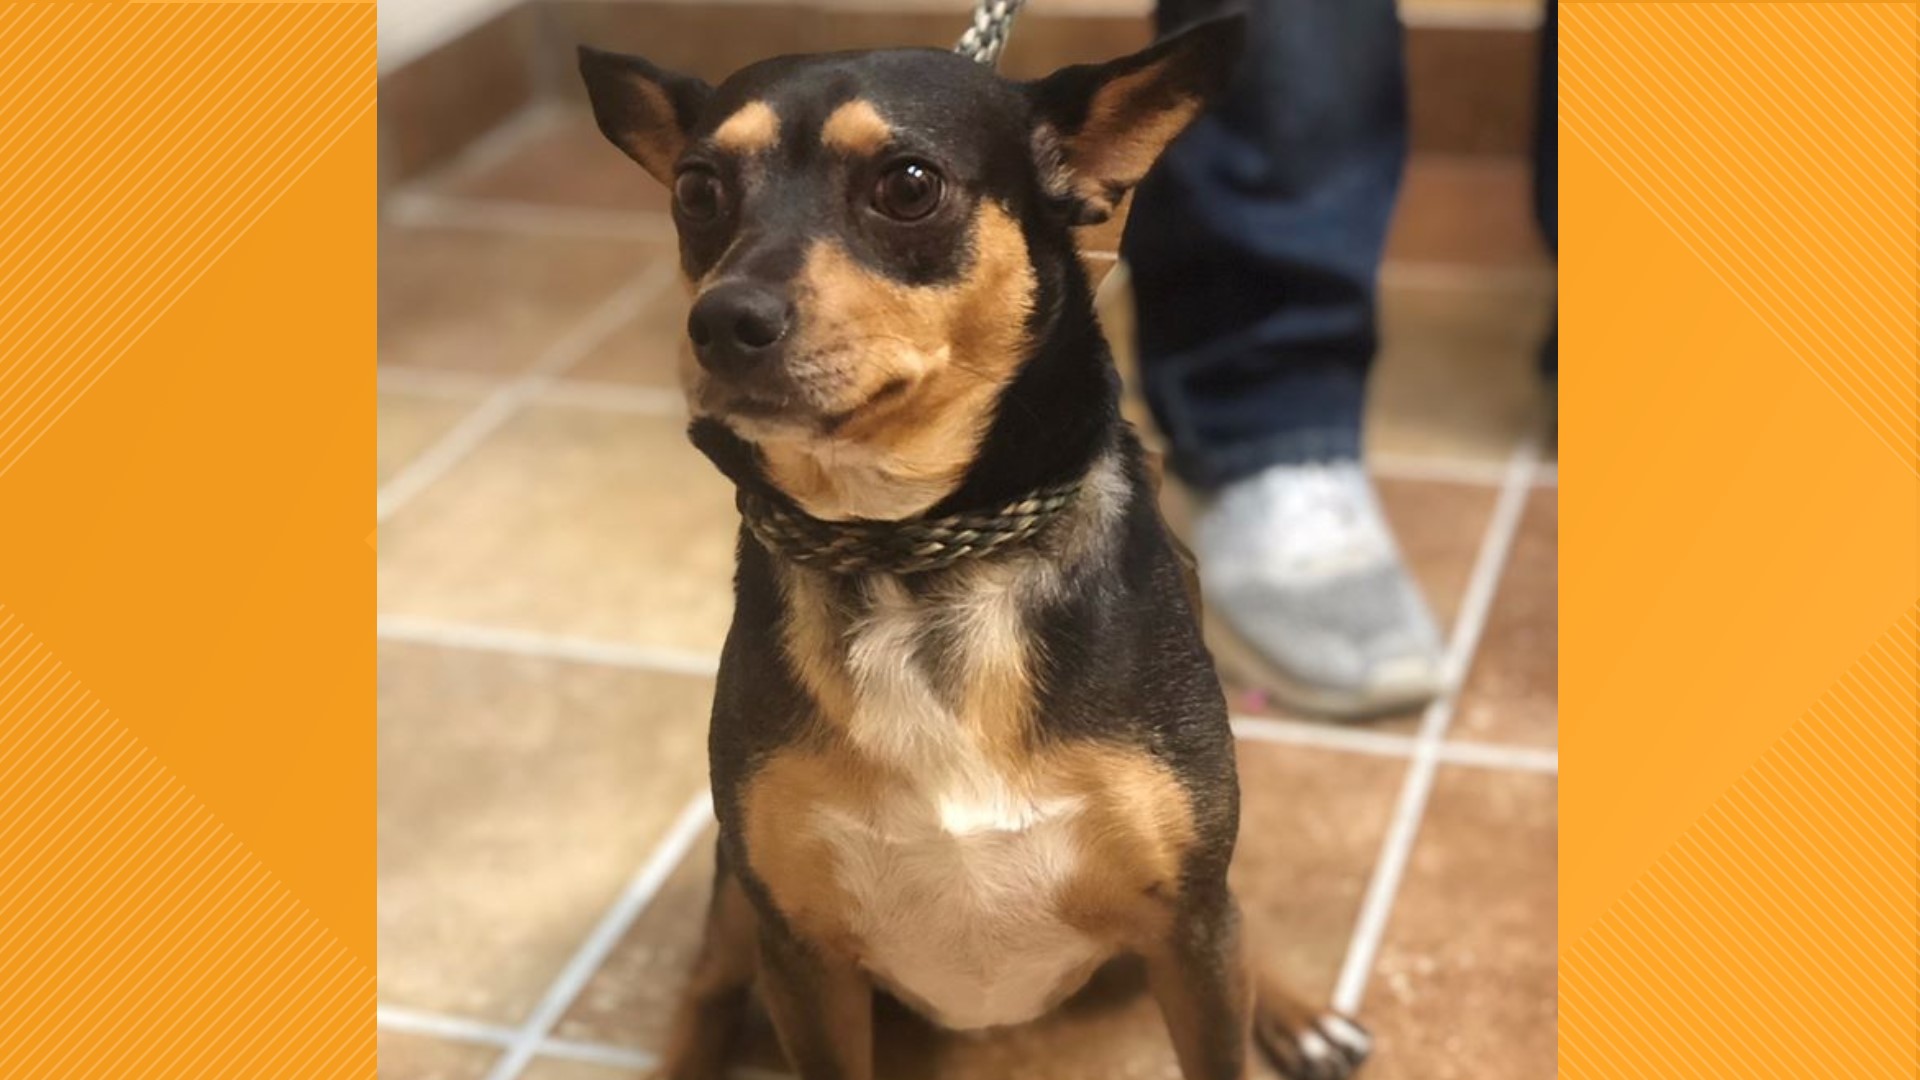 Meet Ralphy, 4-year-old male chihuahua mix who is looking for his forever home.